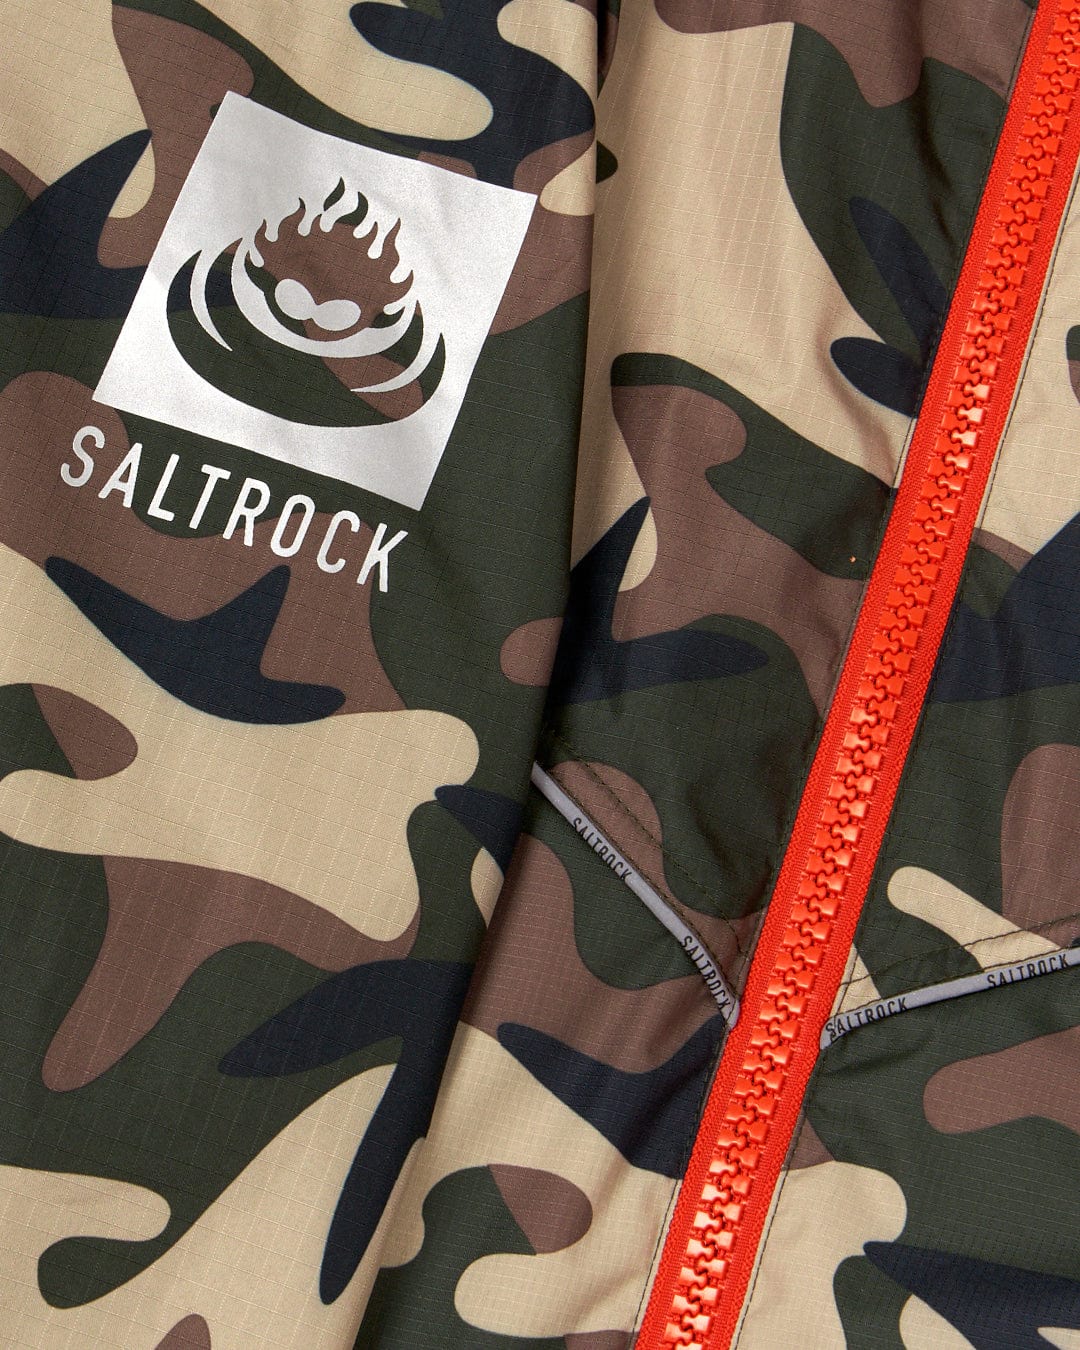 Recycled Four Seasons Changing Robe in Brown Camo with a Saltrock logo and a red zipper detail.